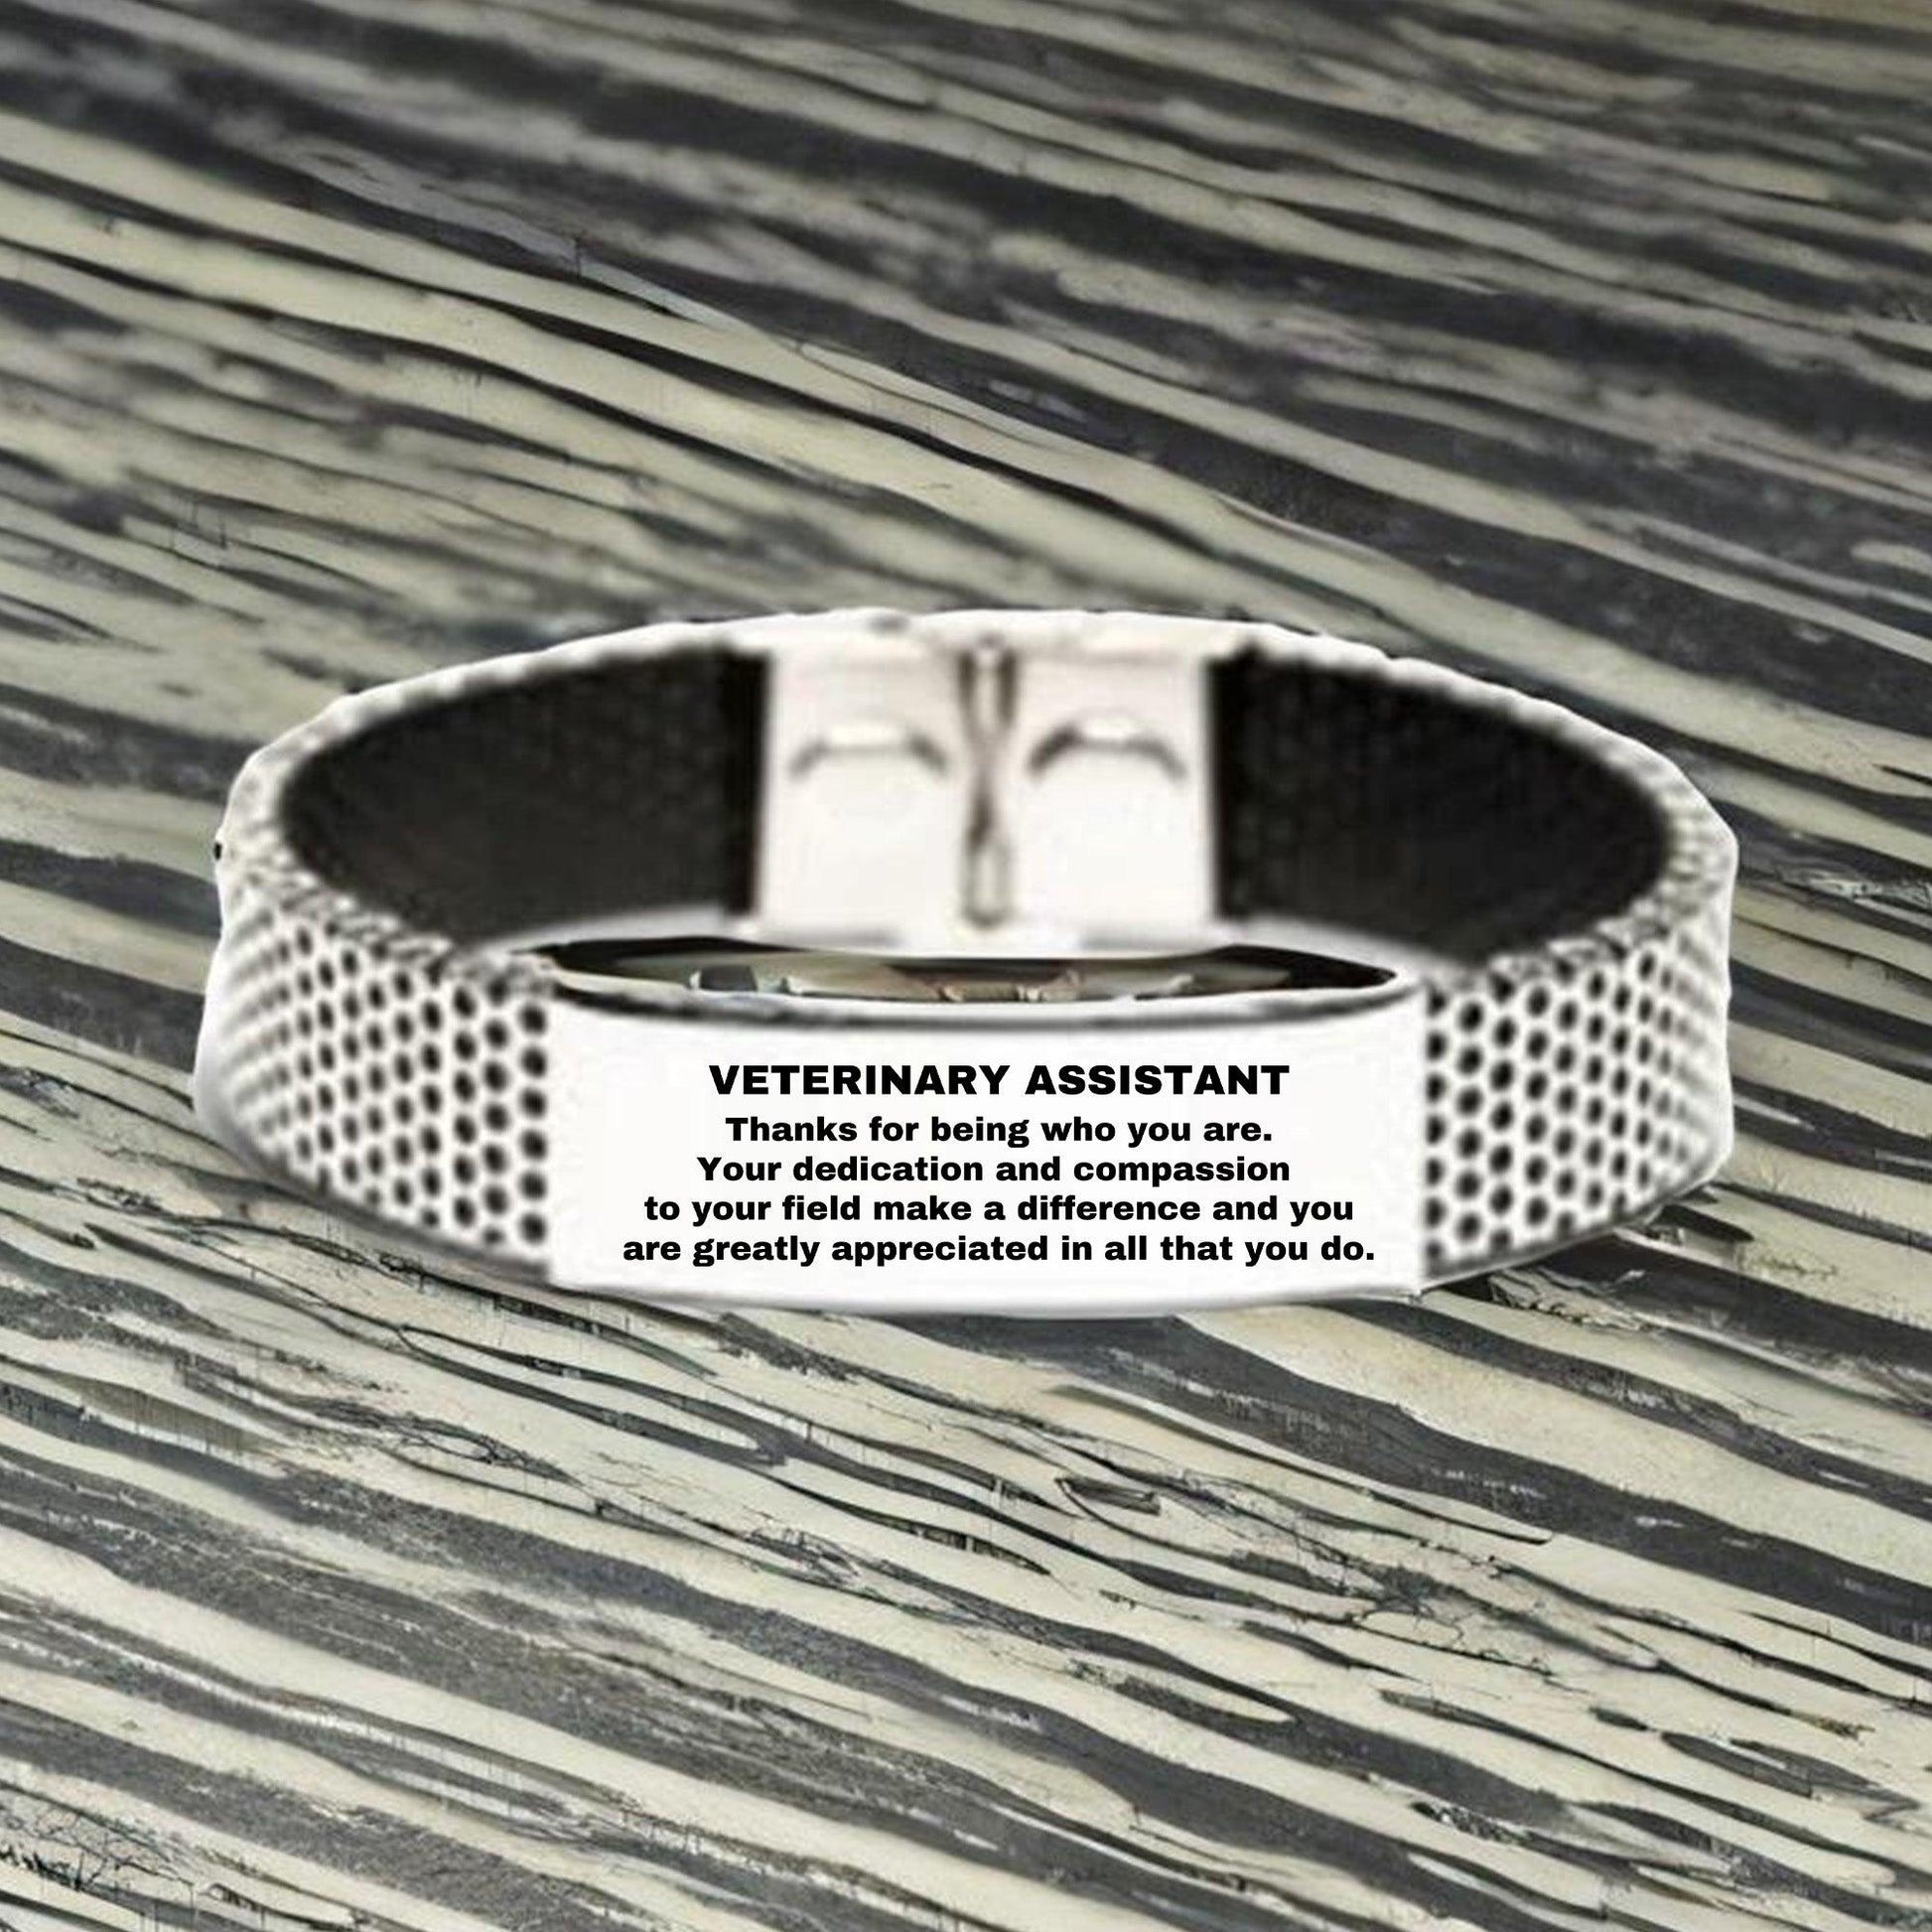 Veterinary Assistant Silver Shark Mesh Stainless Steel Engraved Bracelet - Thanks for being who you are - Birthday Christmas Jewelry Gifts Coworkers Colleague Boss - Mallard Moon Gift Shop